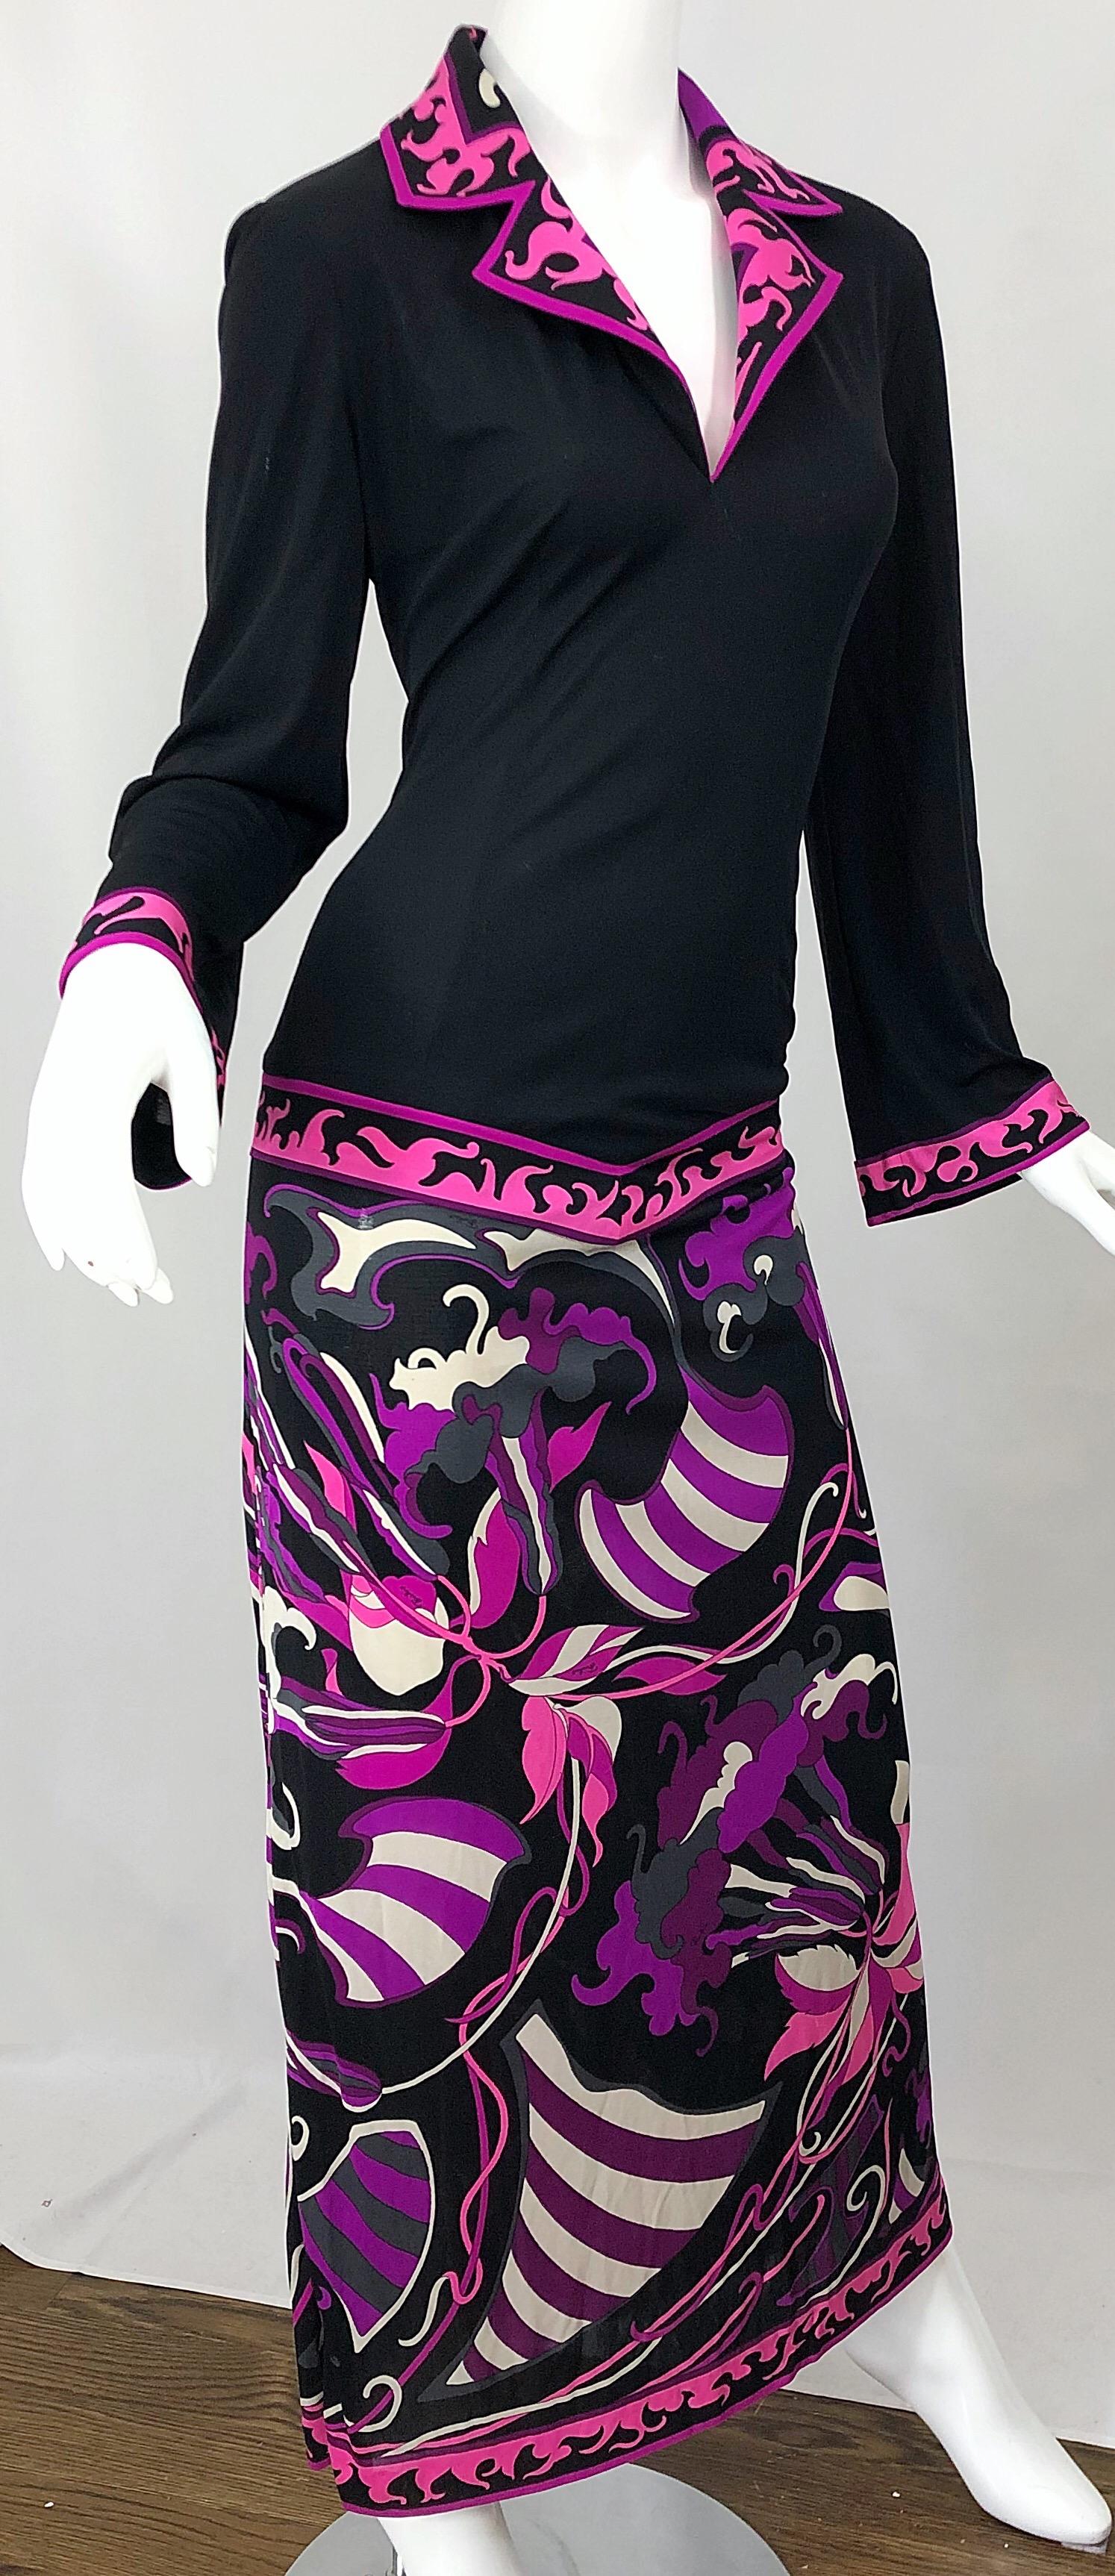 Emilio Pucci 1970s Silk Jersey Pink Purple Black Vintage 70s Maxi Dress In Excellent Condition For Sale In San Diego, CA